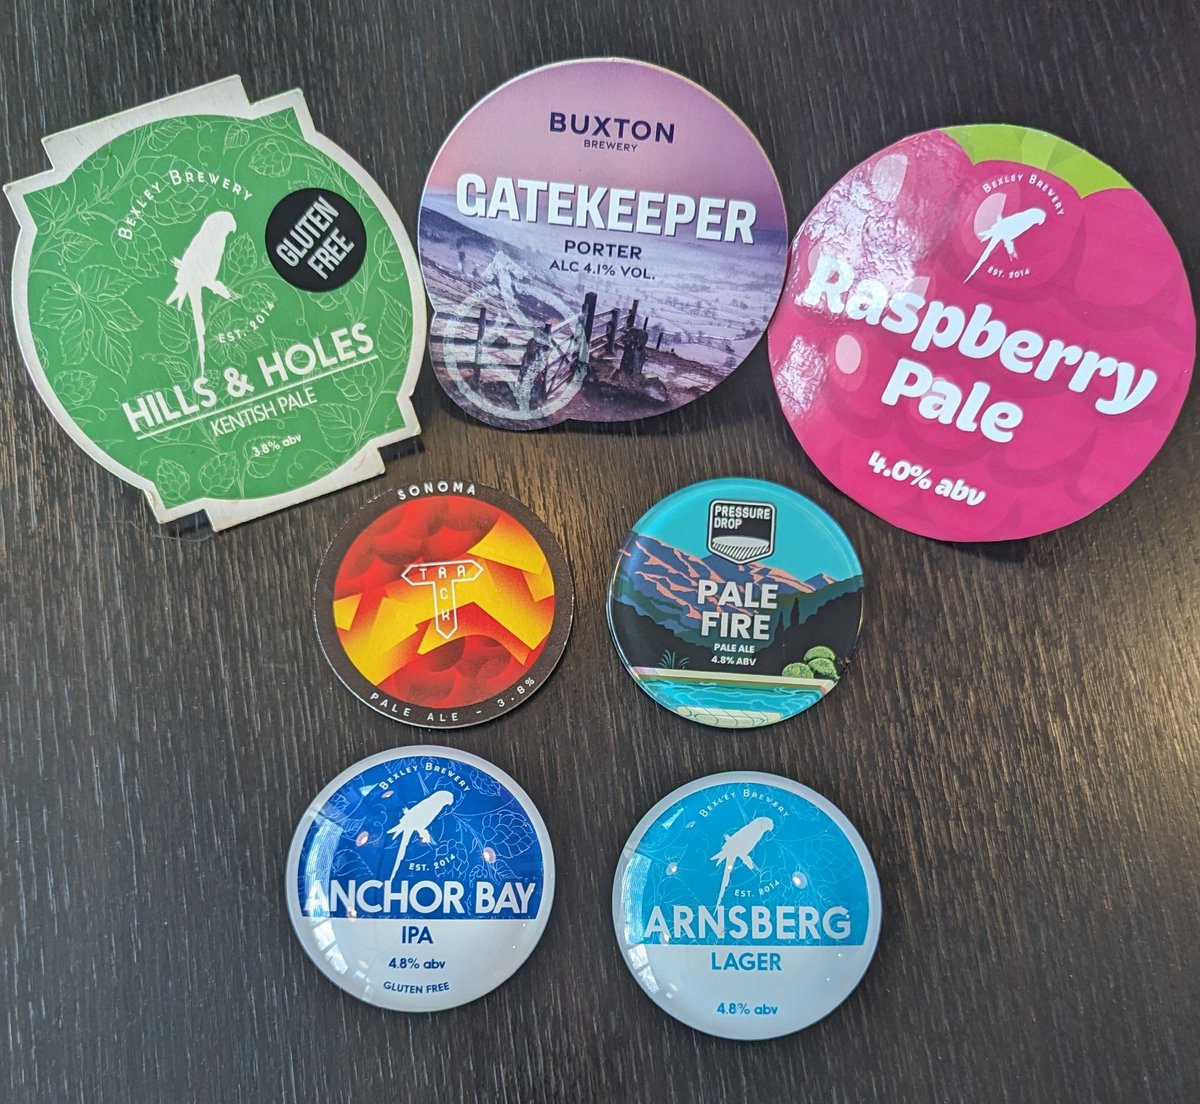 Starting this week with some great beers!🍻 Guest cask from @BuxtonBrewery plus the return of @BexleyBrewery Raspberry Pale - In case you missed it at the Bexley Beer Festival!🍻 Guest kegs from @trackbrewco & @PressureDropBrw #caskbeer #kegbeer #bexleybrewery #micropub